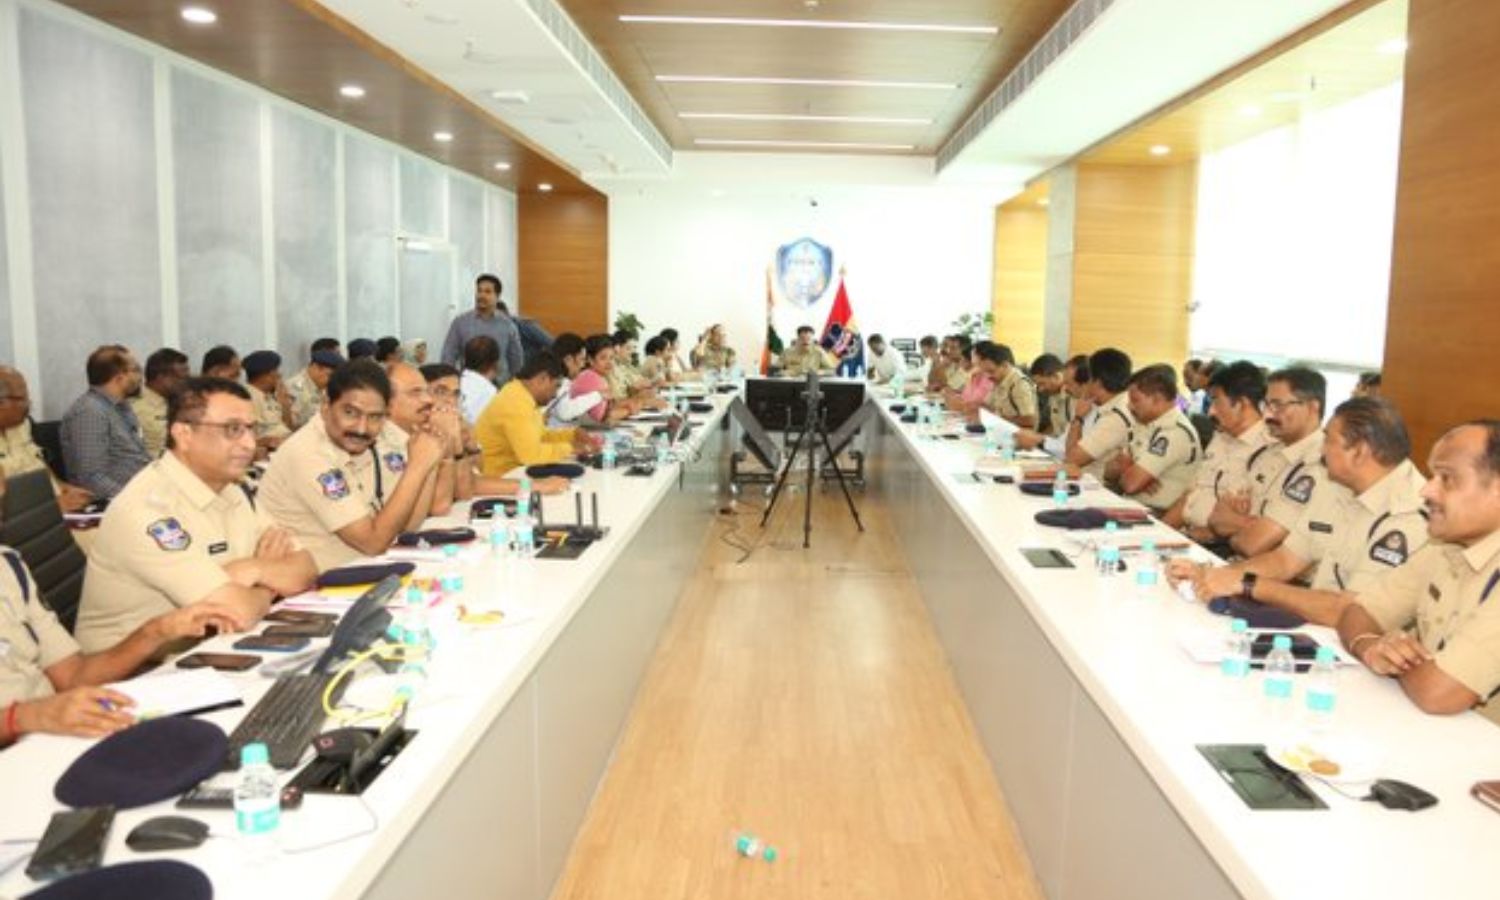 Hyderabad Authorities Coordinate Multi Agency Efforts For Peaceful Bakrid Festival In City